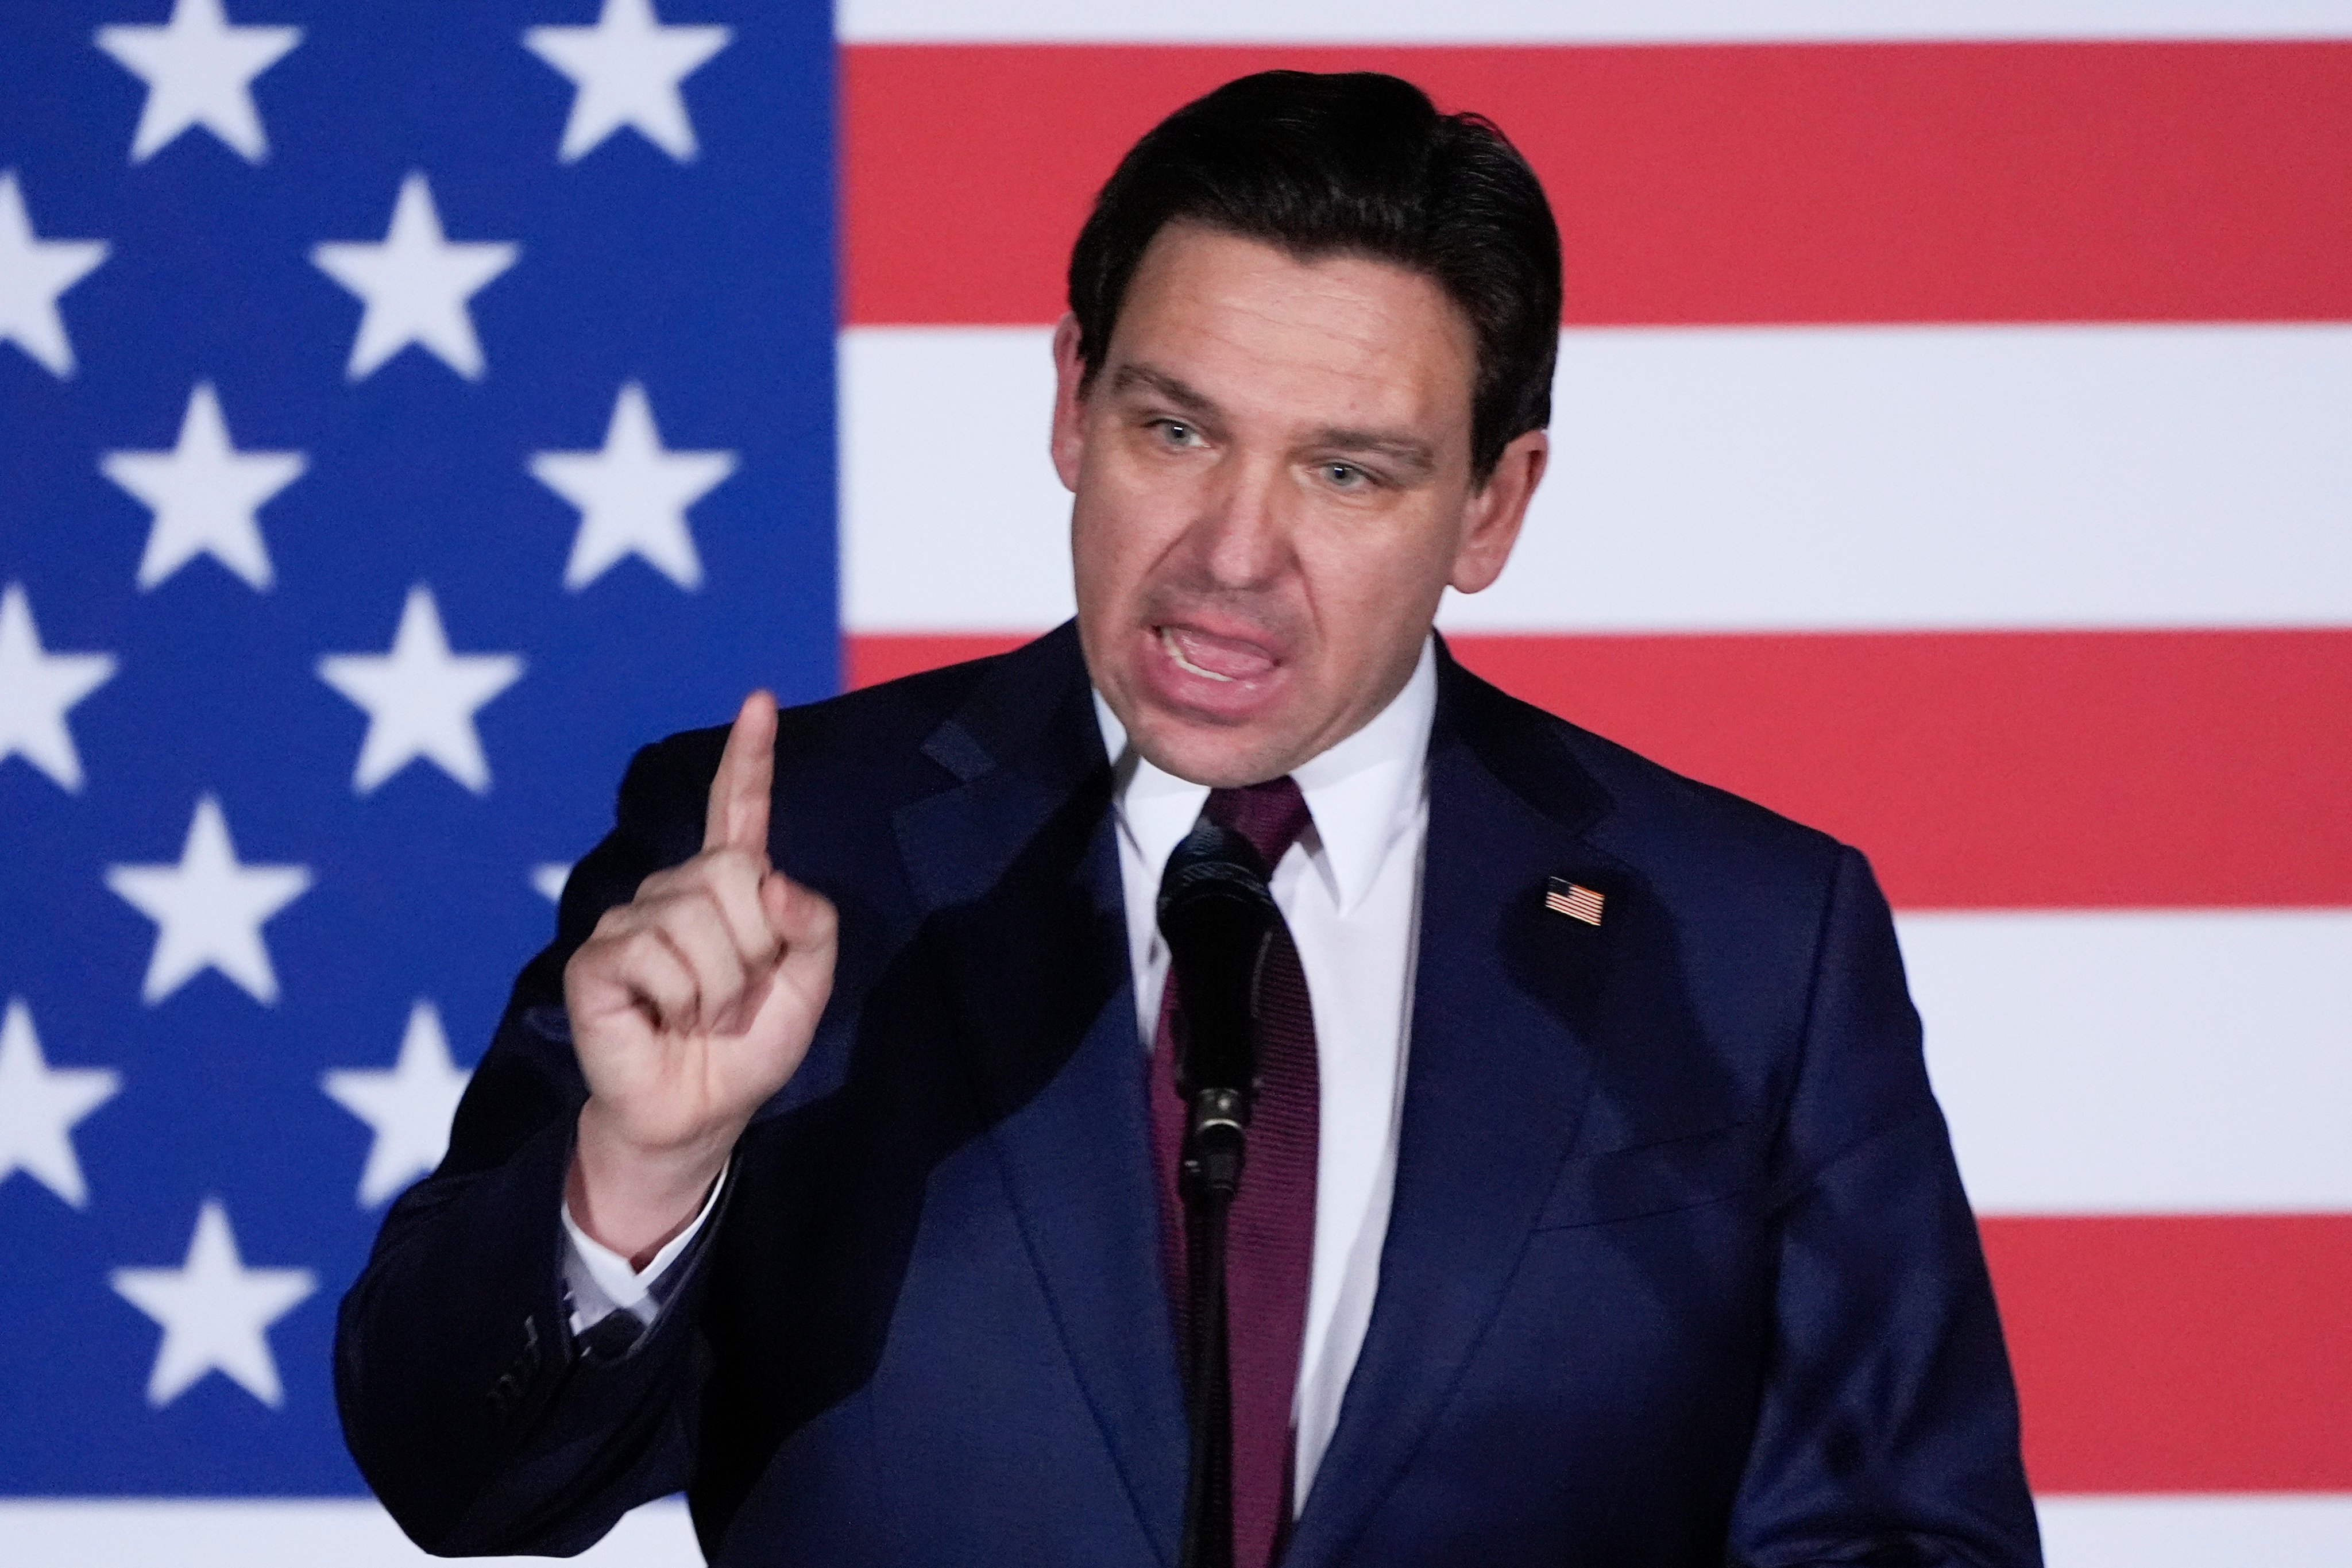 Florida Governor Ron DeSantis speaks in Iowa in January. The former 2024 Republican presidential candidate previously said the law would help protect Americans from the influence of the Chinese Communist Party. Photo: AP